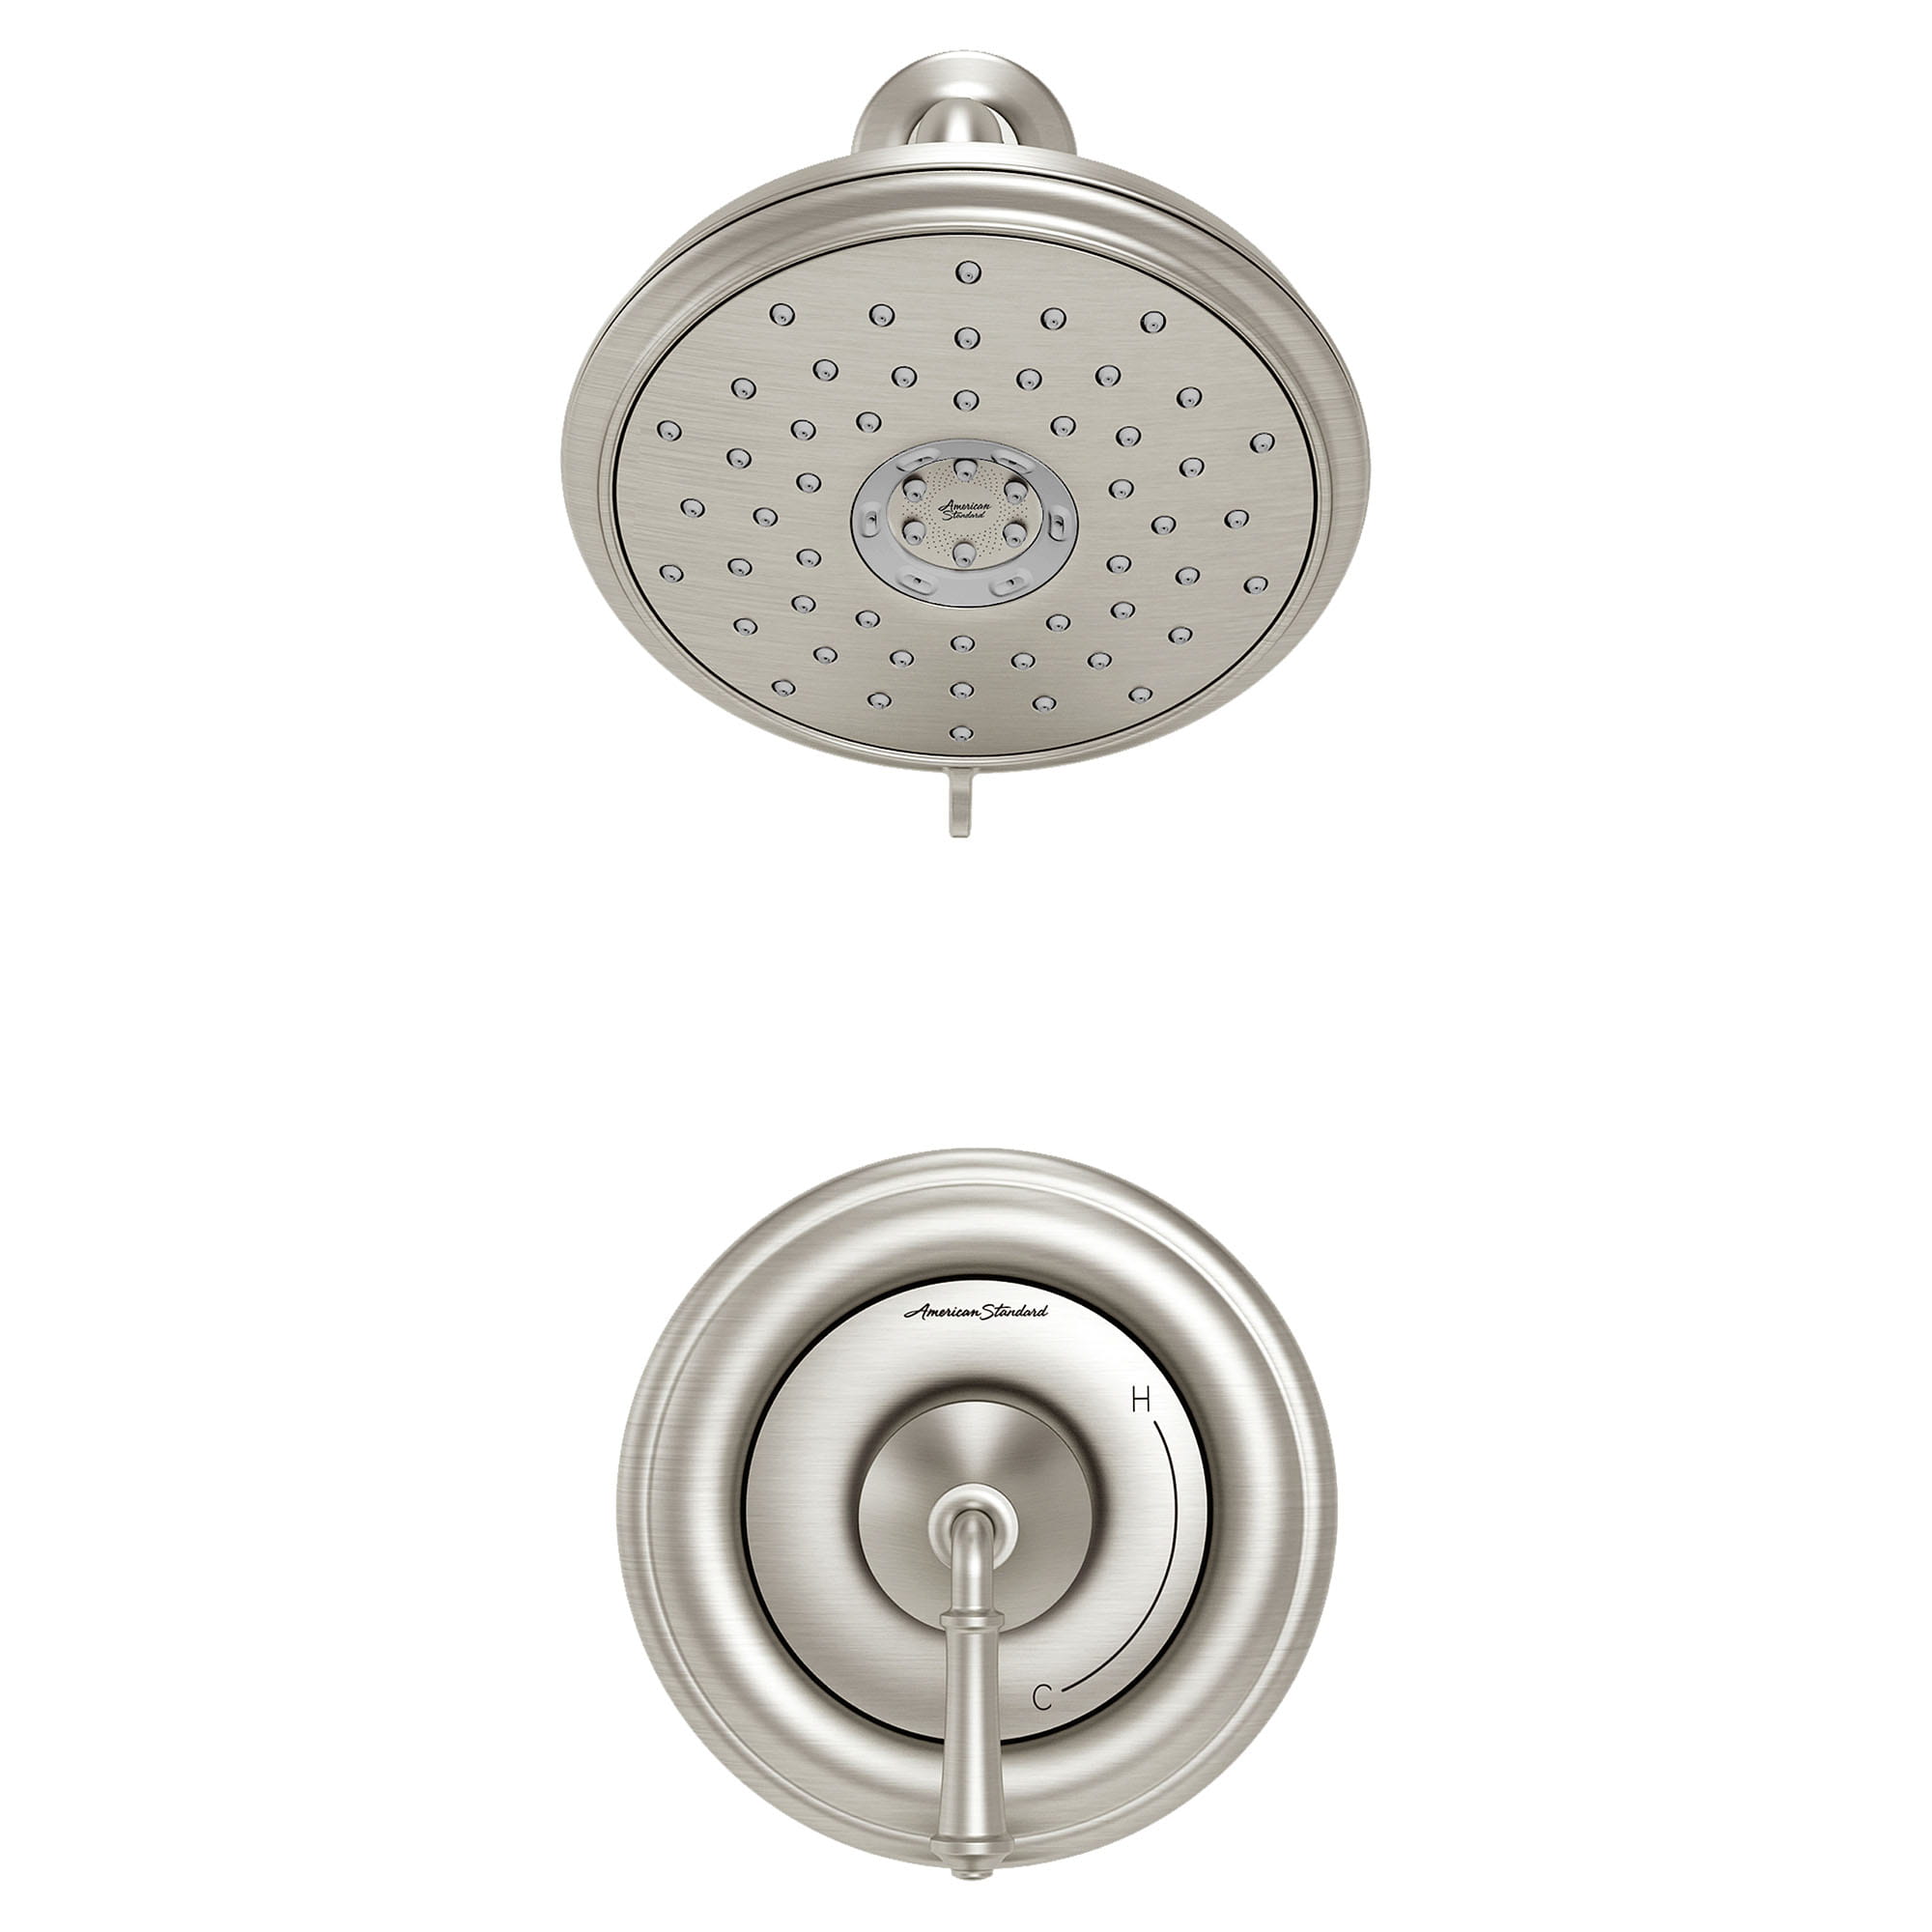 Portsmouth 18 GPM Round Shower Trim Kit with Water Saving Showerhead and Double Ceramic Pressure Balance Cartridge with Lever Handle   BRUSHED NICKEL